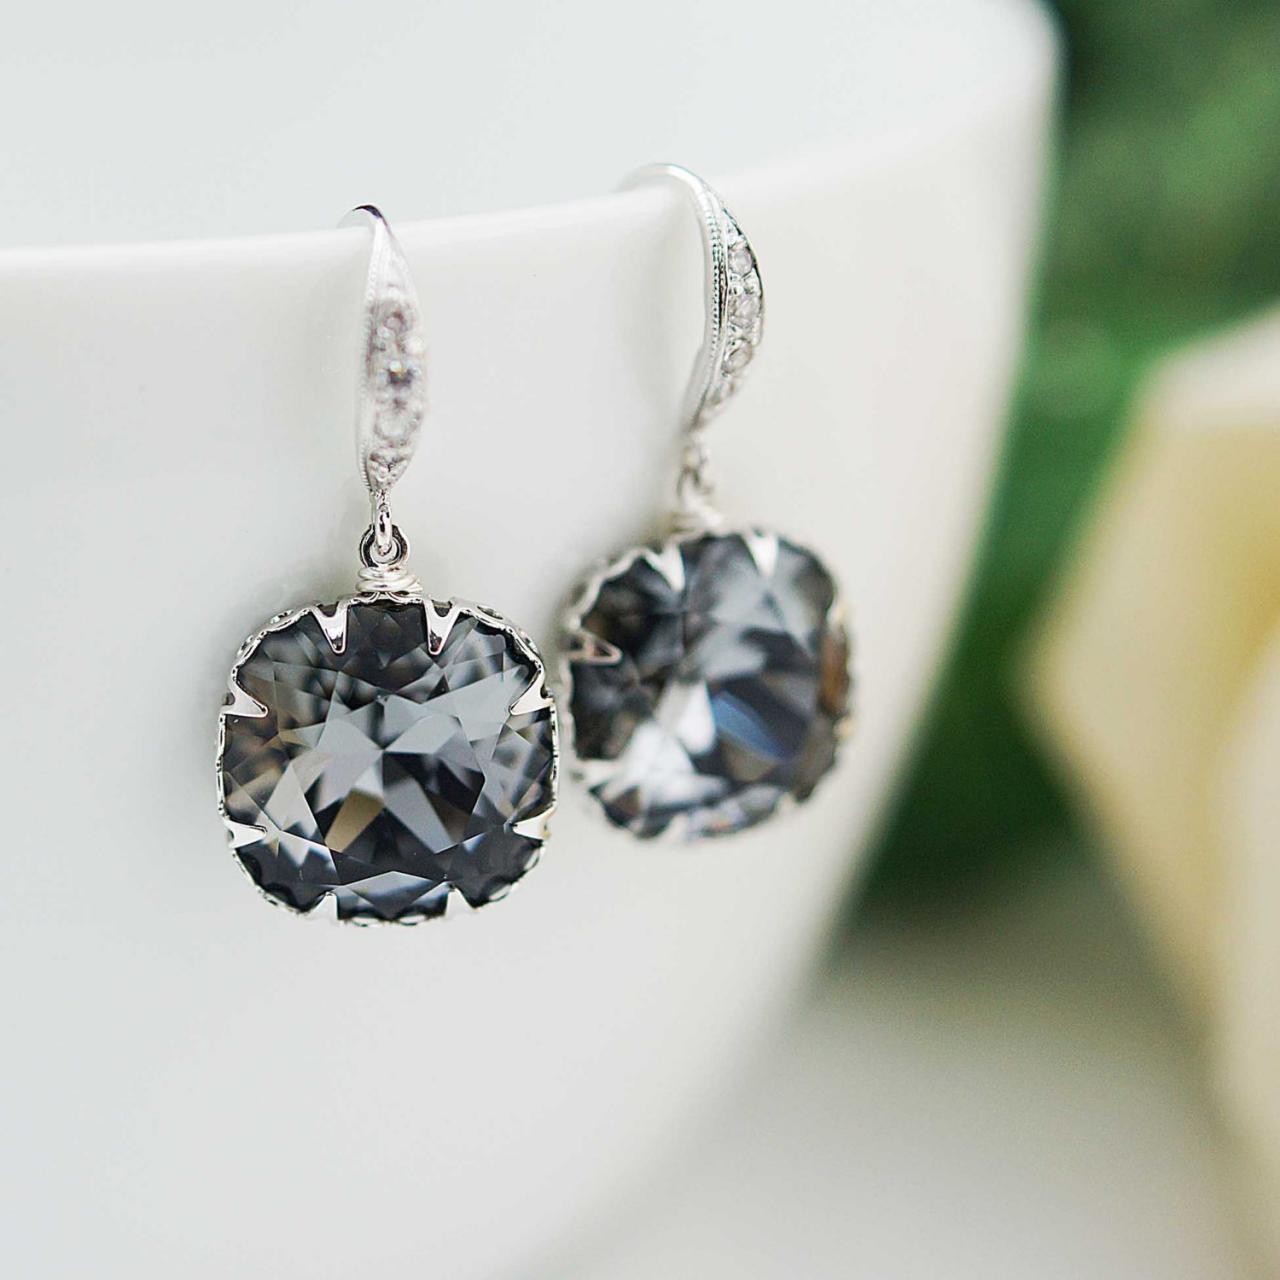 Bridal Earrings Bridesmaid Earrings Rodium Plated Over Sterling Silver Ear Hooks With Crystal Silver Night Swarovski Crystal Square Drops